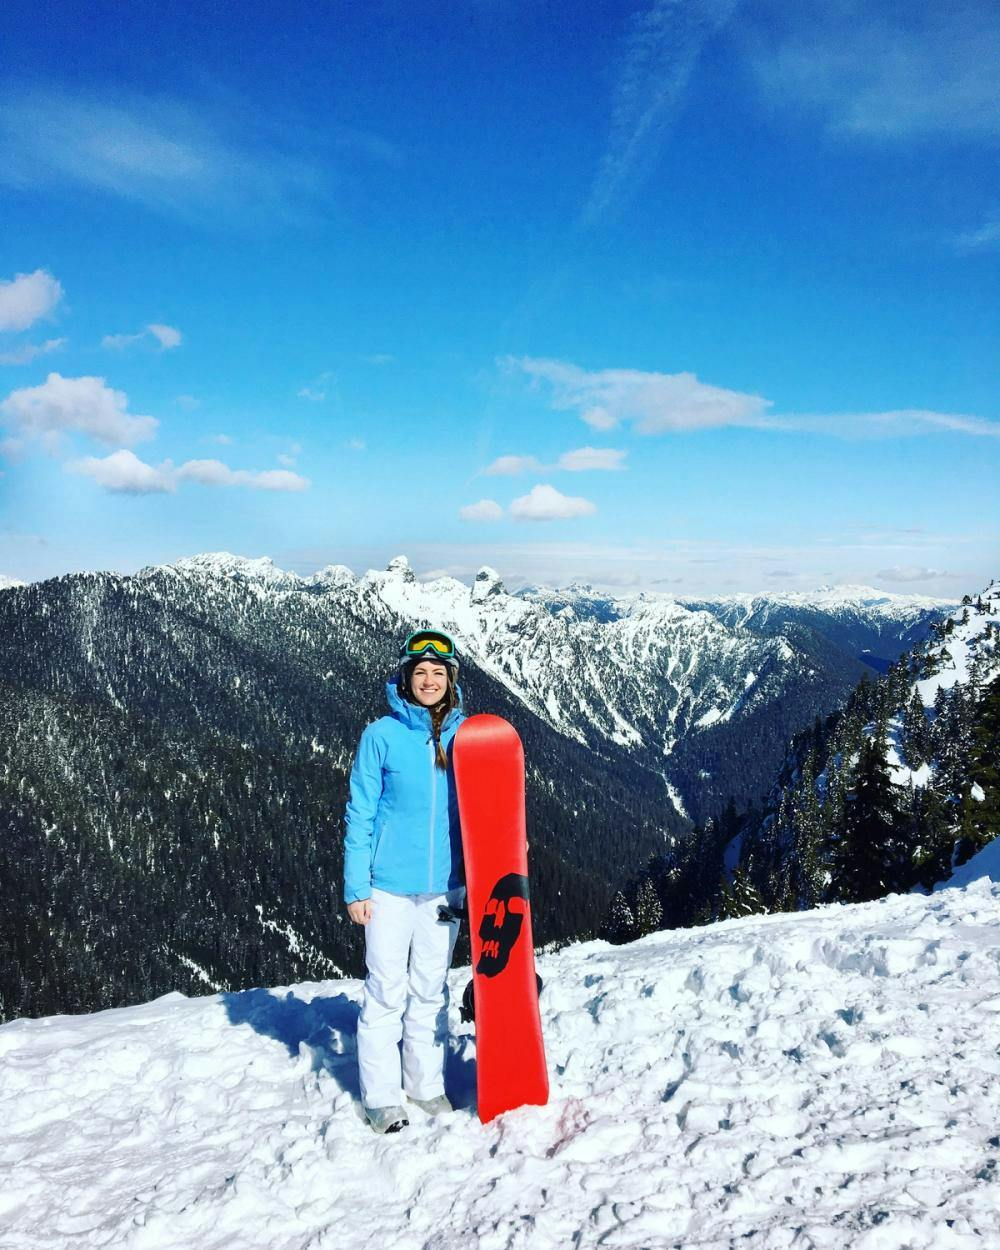 Alicia Stirling in blue and white snowboard gear holding a red snowboard on a snowy mountain